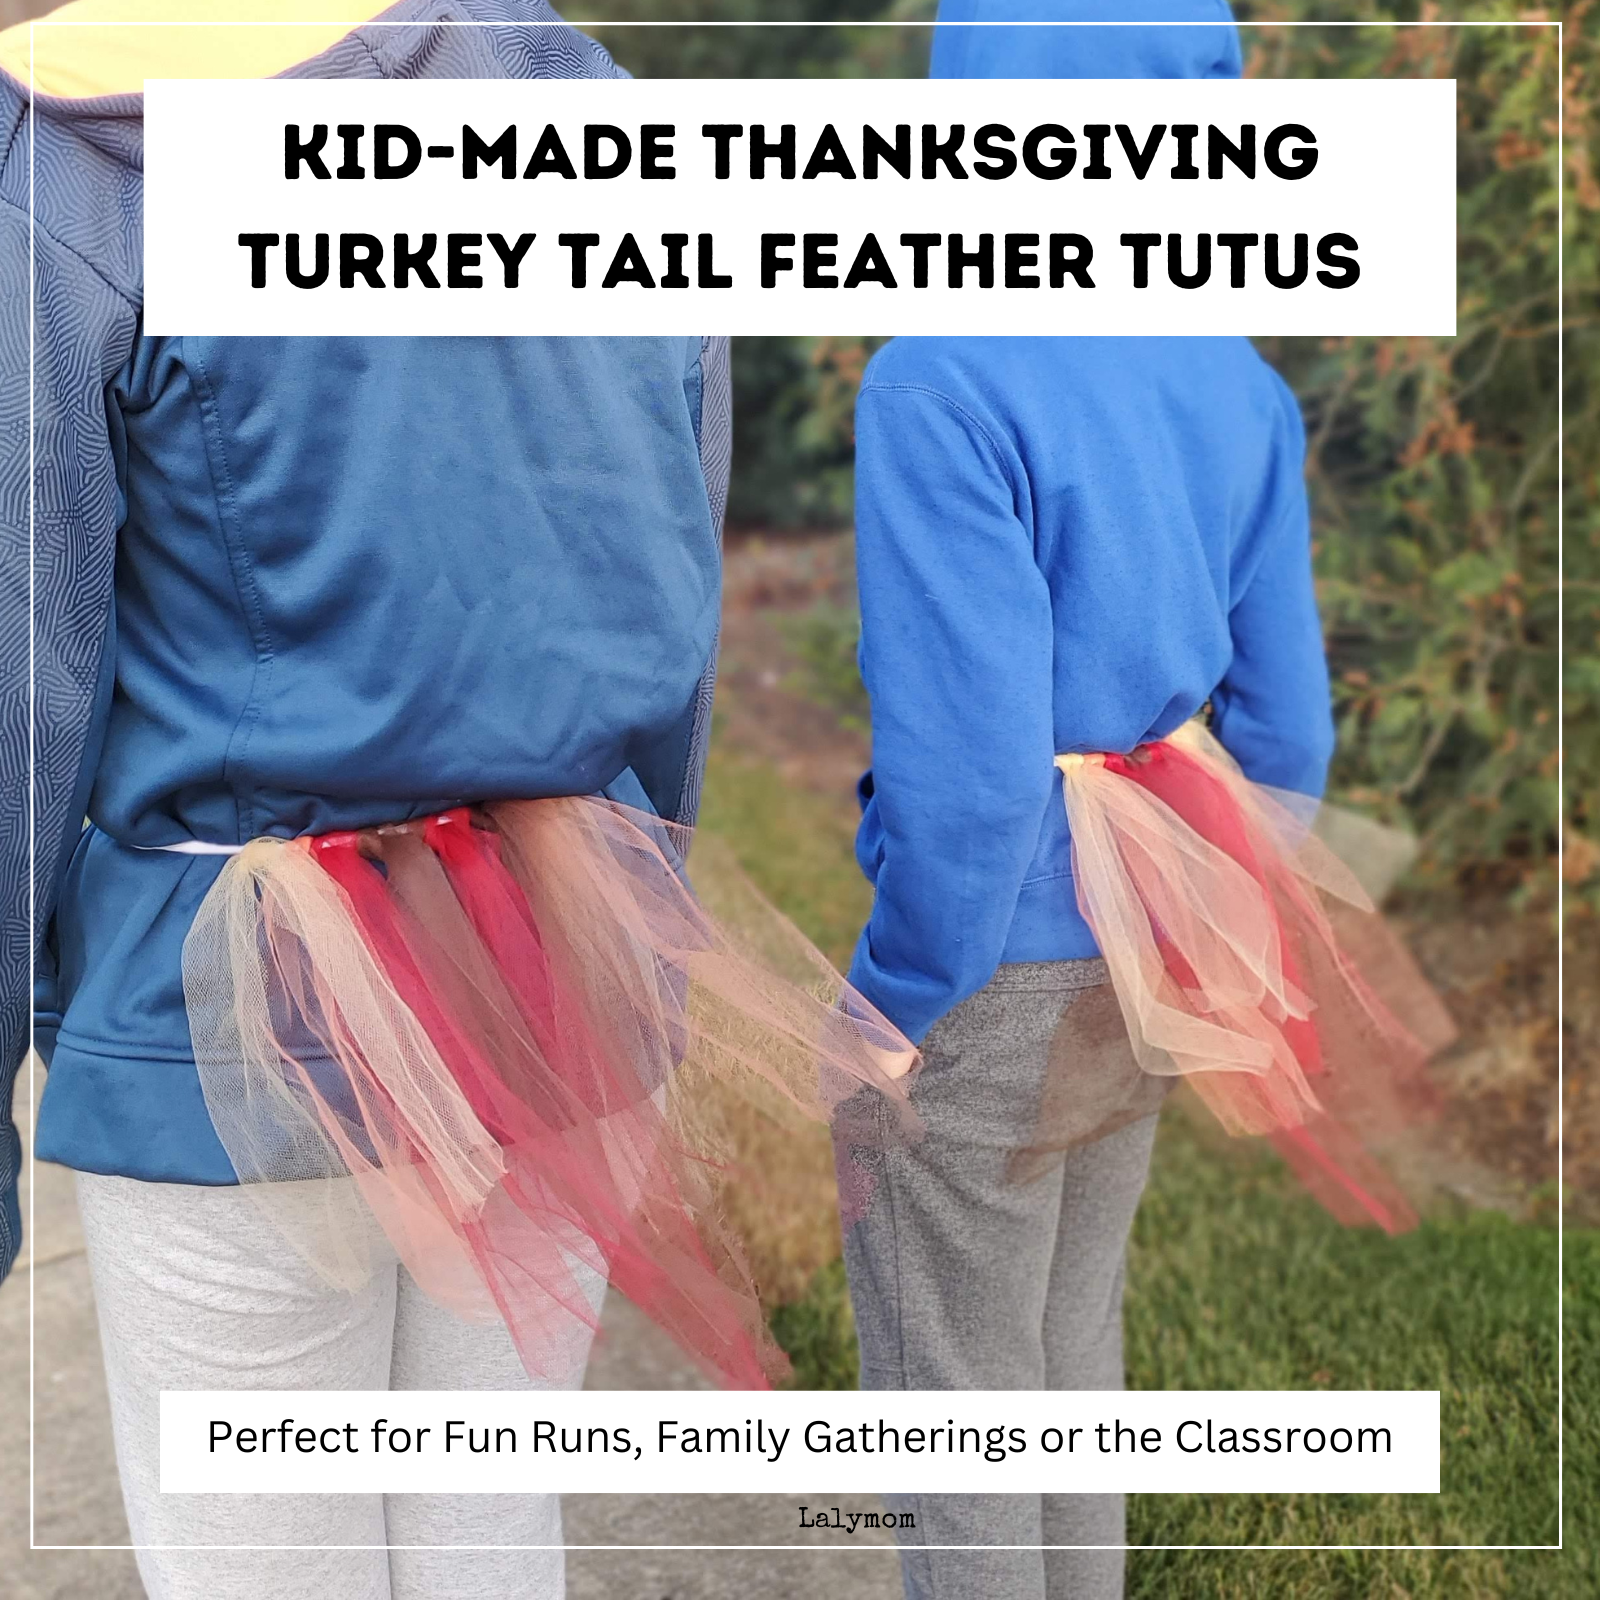 Photo of two kids wearing tutus made of red, yellow, orange and brown tulle. Kid made thanksgiving turkey tail feather tuts.